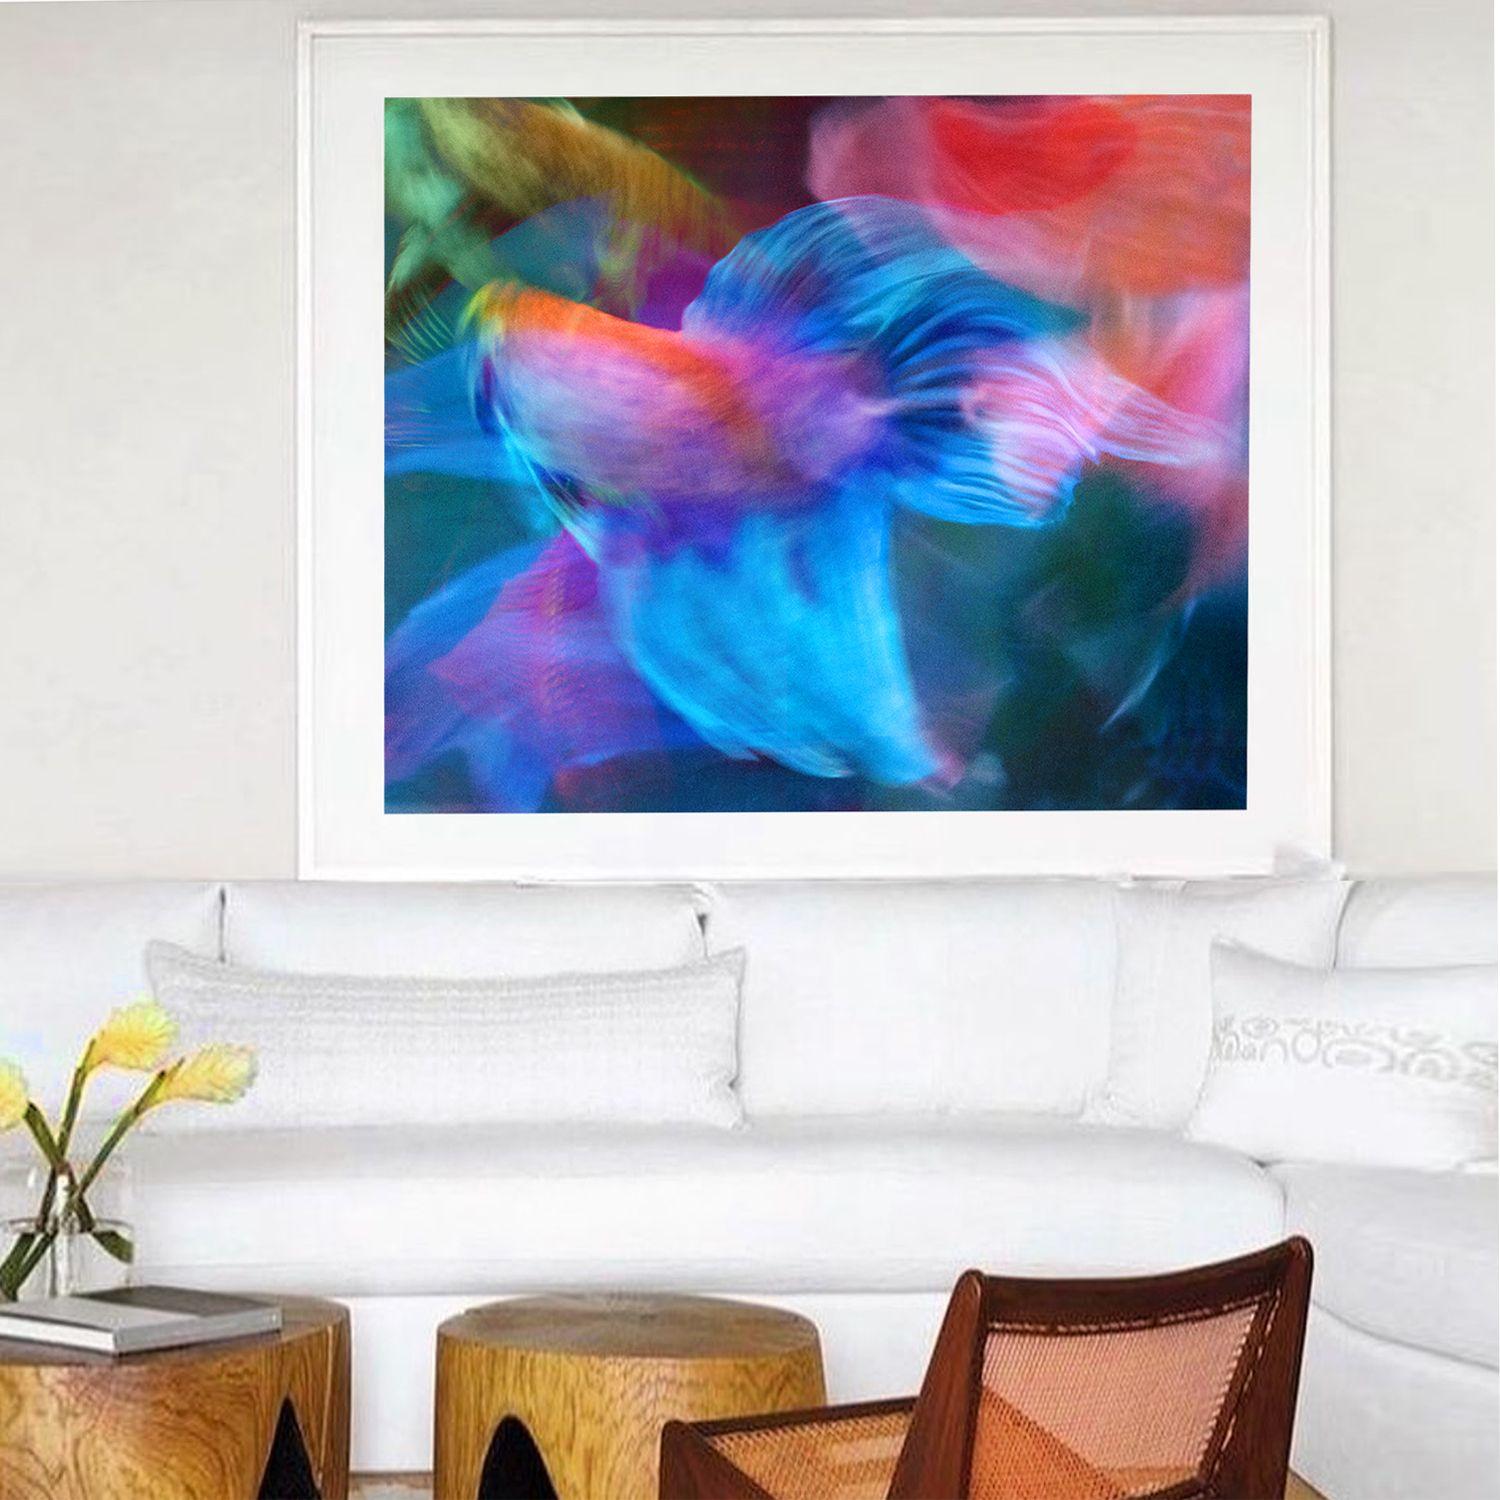 Color Photography of several male betta fish swimming together. Printed on Archival Fine Art Paper. :: Photograph :: Color :: This piece comes with an official certificate of authenticity signed by the artist :: Ready to Hang: Yes :: Signed: Yes ::